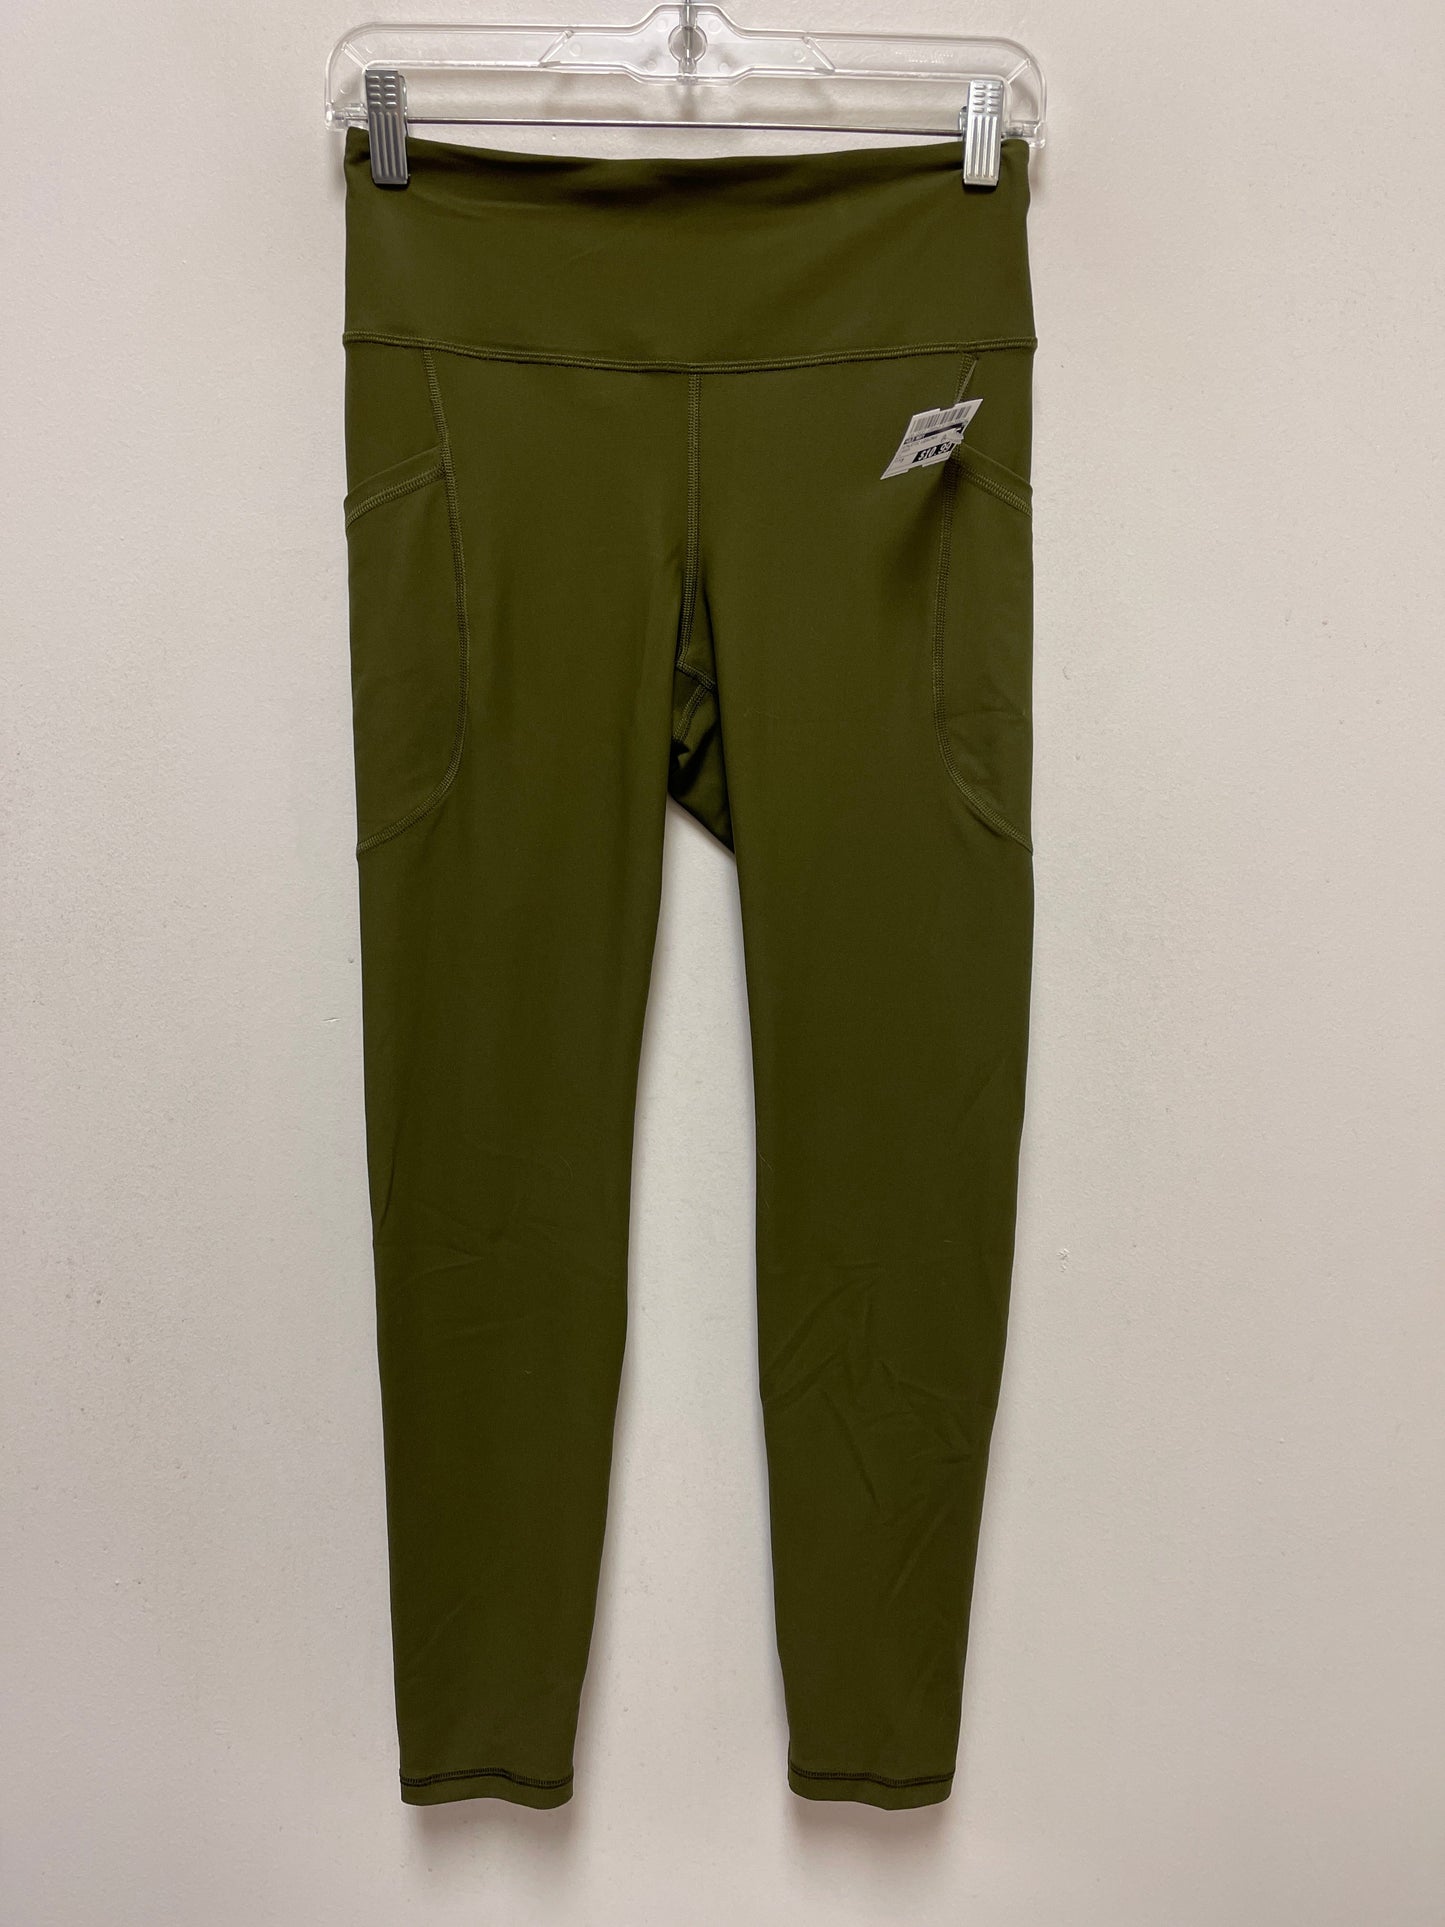 Green Athletic Leggings Old Navy, Size M